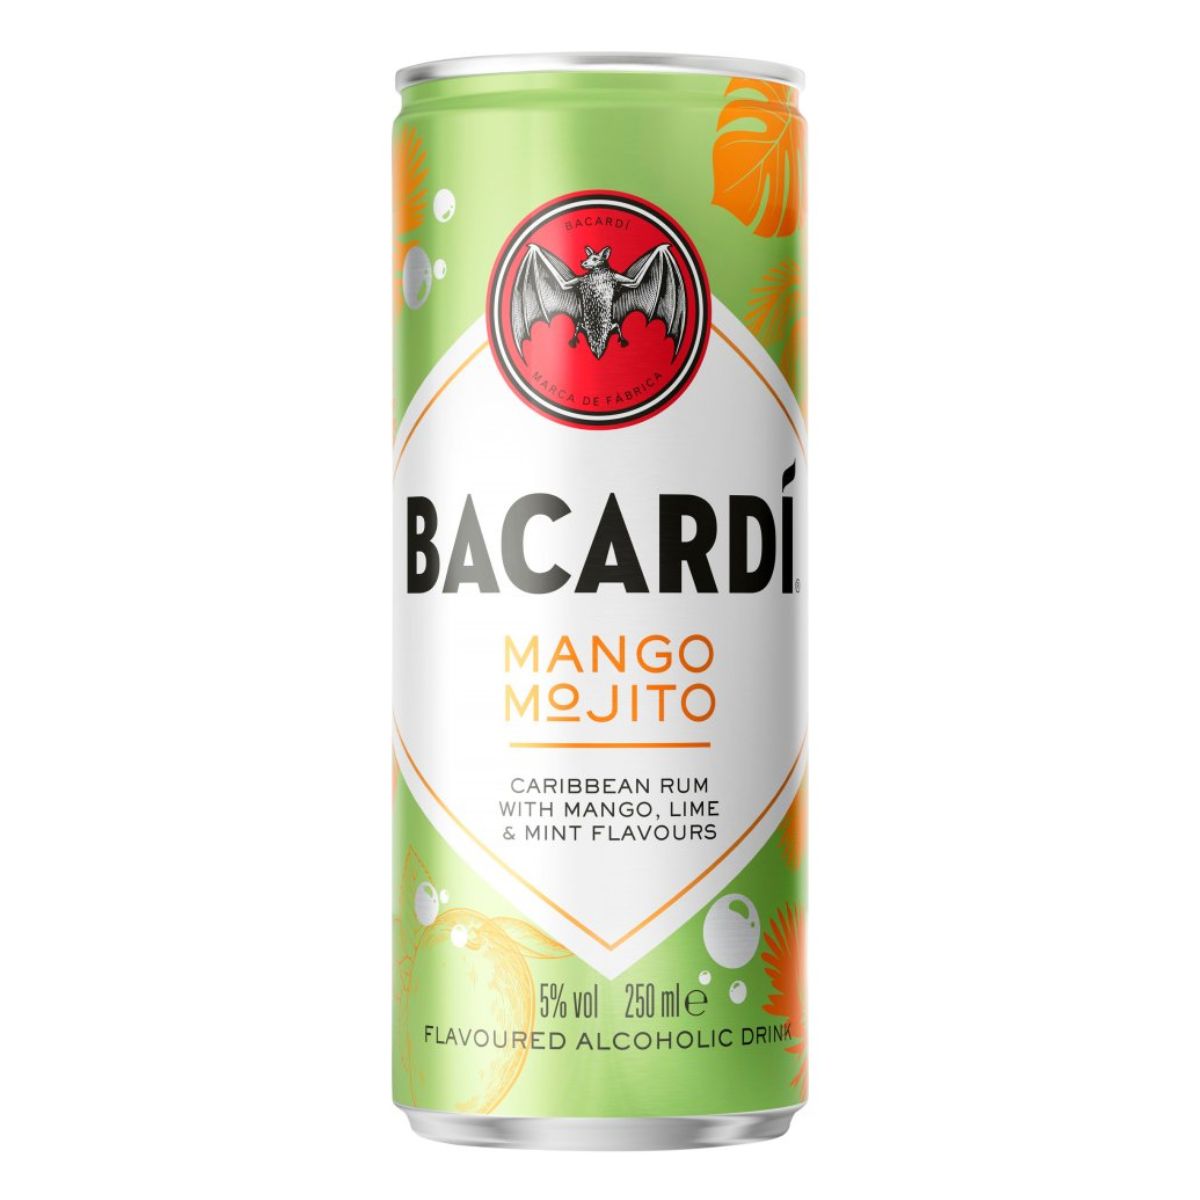 A can of Bacardi - Mango Mojito Flavoured Alcoholic Drink (5% ABV) - 250ml on a white background.